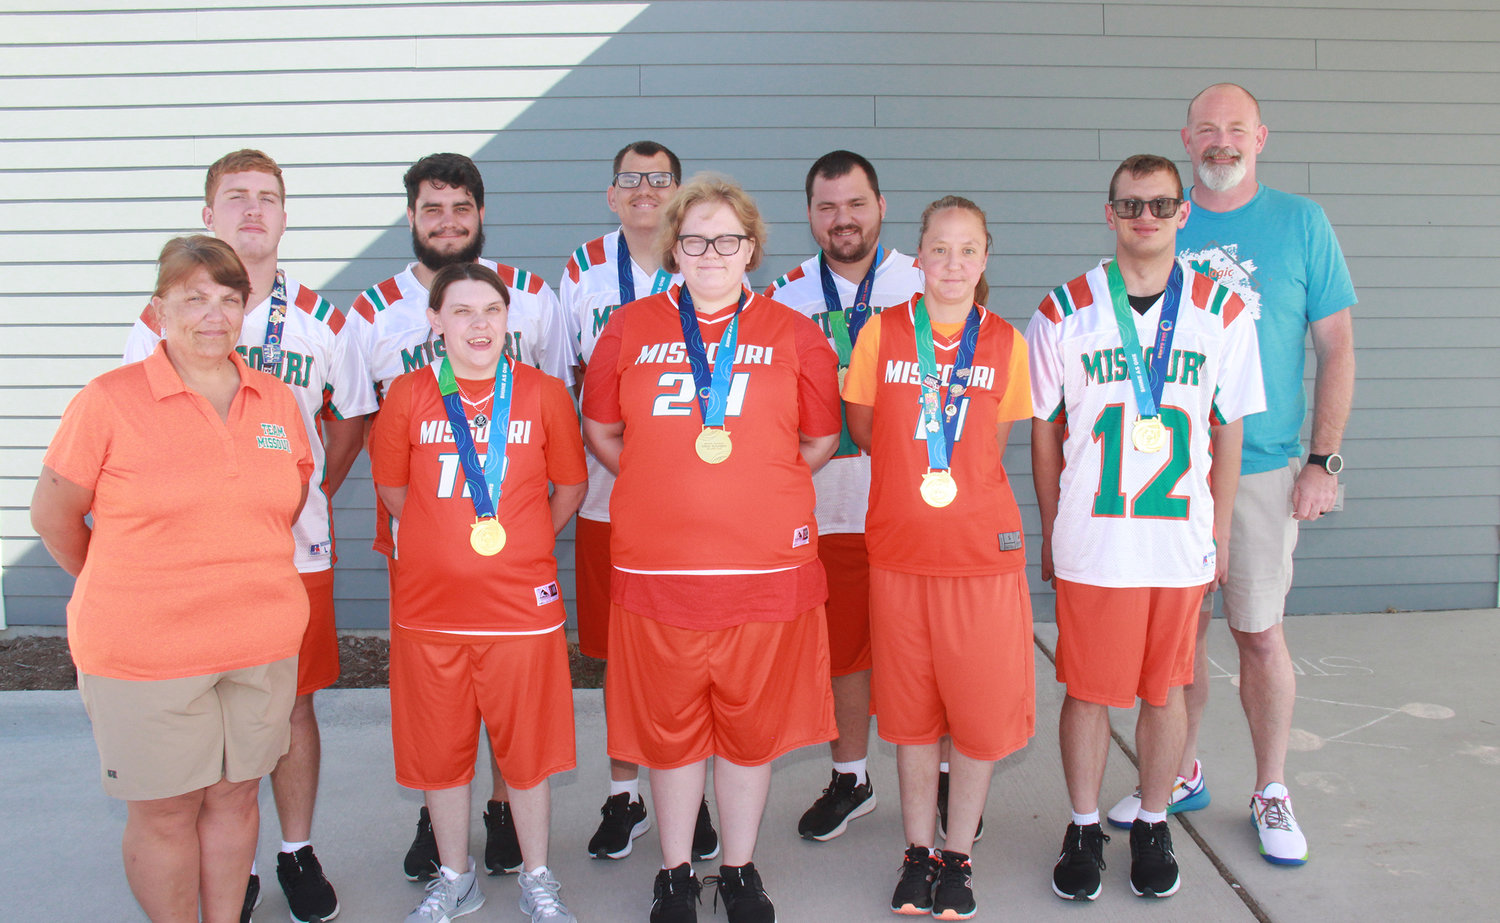 MEDALISTS — Special Olympics athletes from Warren County display the gold medals they earned at the 2022 USA Games in Orlando, Florida. Pictured in front, from left, are Assistant Coach Julie Busken and athletes Emily Carroll, Brooke Timmerberg, Emily Green and Devin Bock. In back are athletes Jacob Ritter, Dillen Mayfield, Michael Mohrmann, Jonathan Martin, and Coach Rich Black.